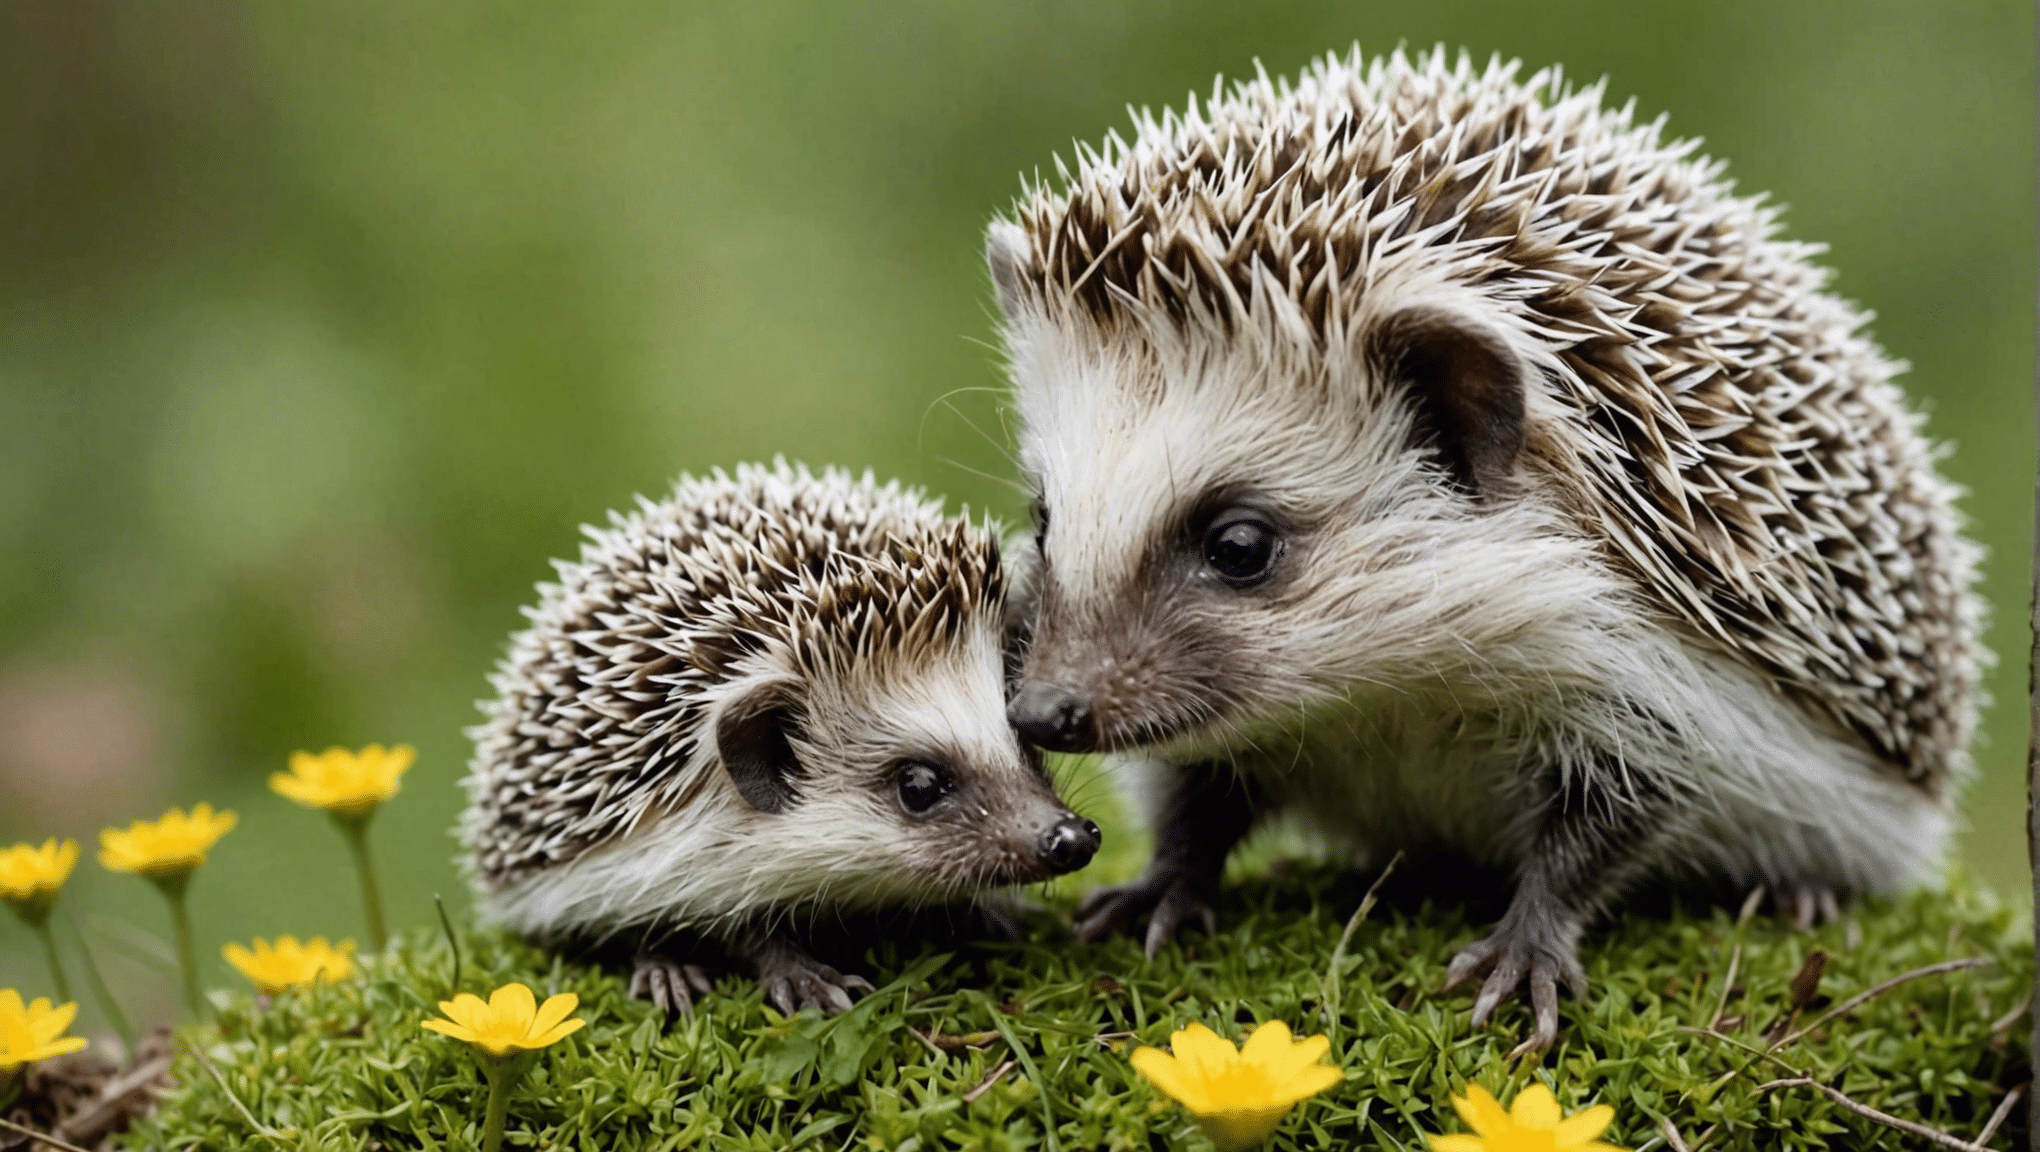 learn how to care for baby hedgehogs with our comprehensive guide. from feeding to housing, we've got you covered!